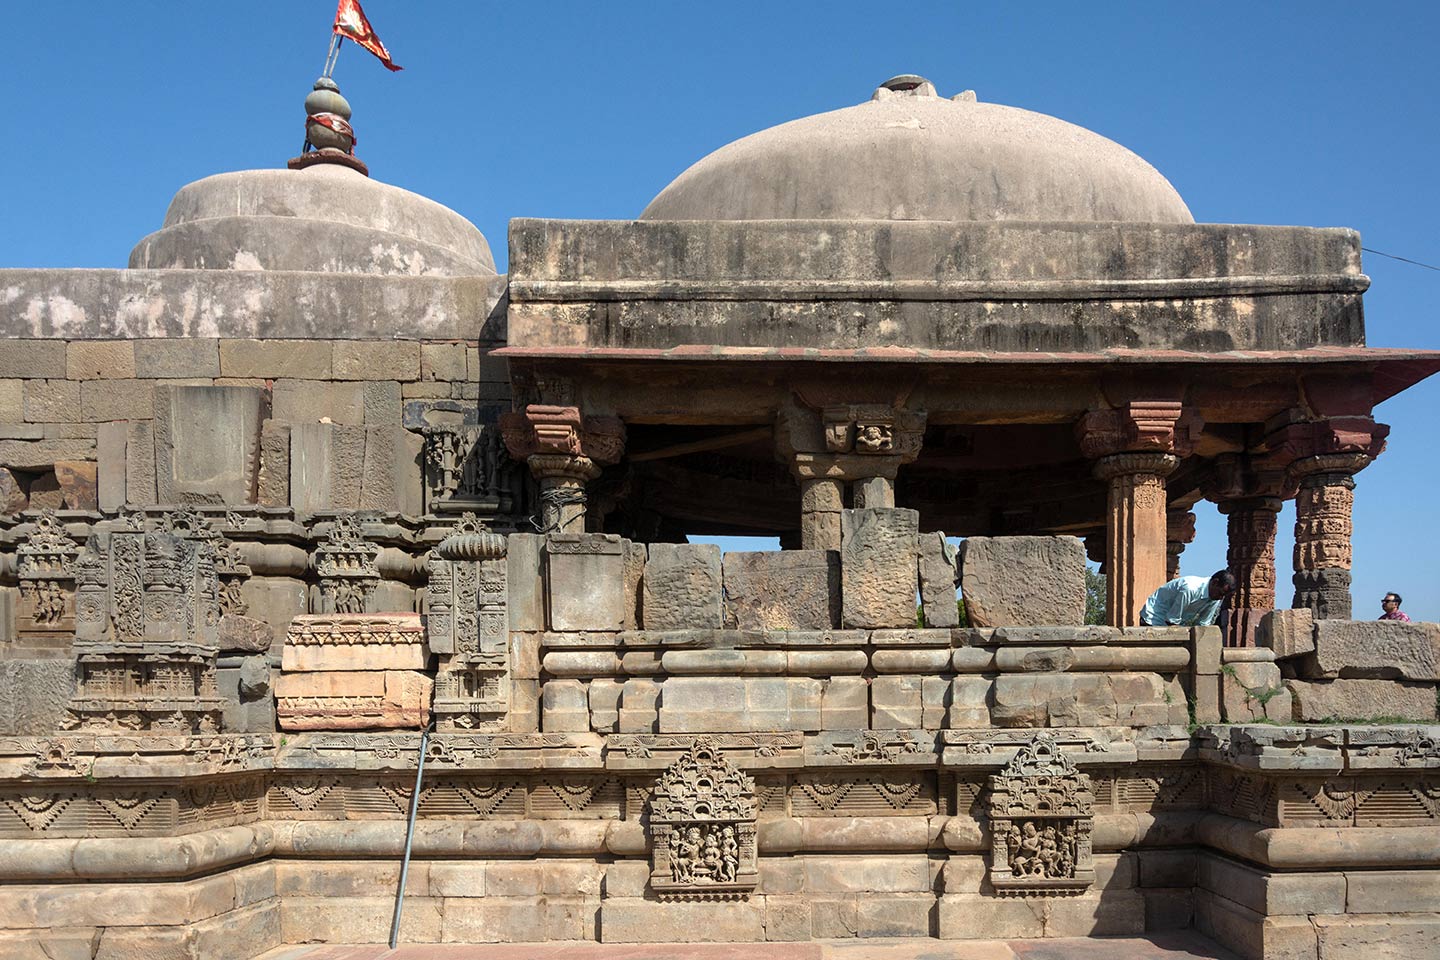 The space in front of the garbhagriha (sanctum sanctorum) is the maha mandapa which is used as a congregation space and for conducting rituals. Instead of the traditional shikhara over the garbhagriha, the temple was reconstructed with concrete domes over the garbhagriha and the maha mandapa.